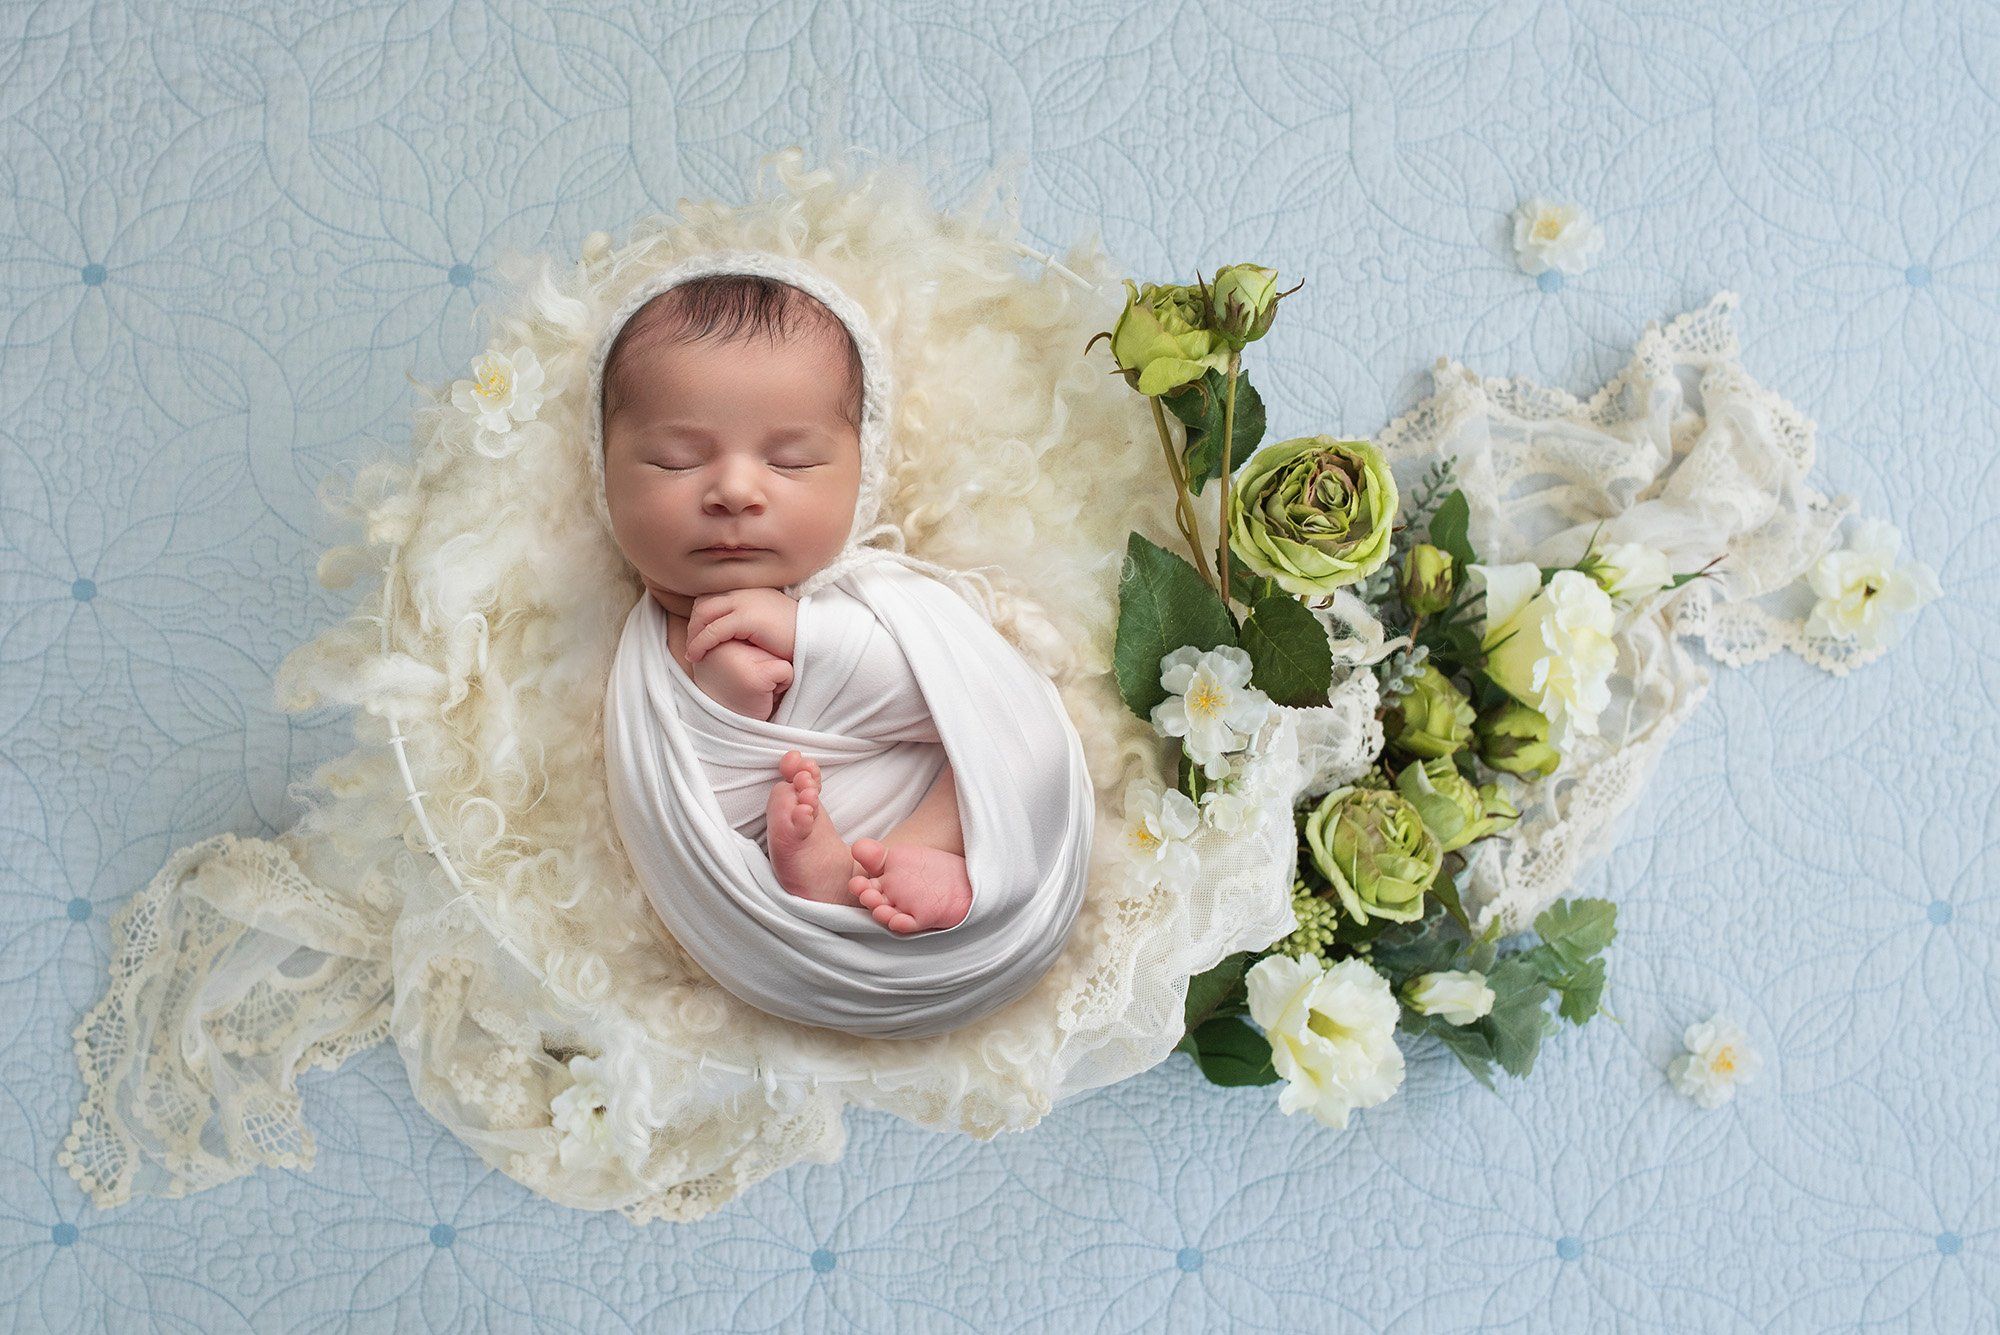 baby girl swaddled in white laying on top of antique lace blanket with white and green floral accents